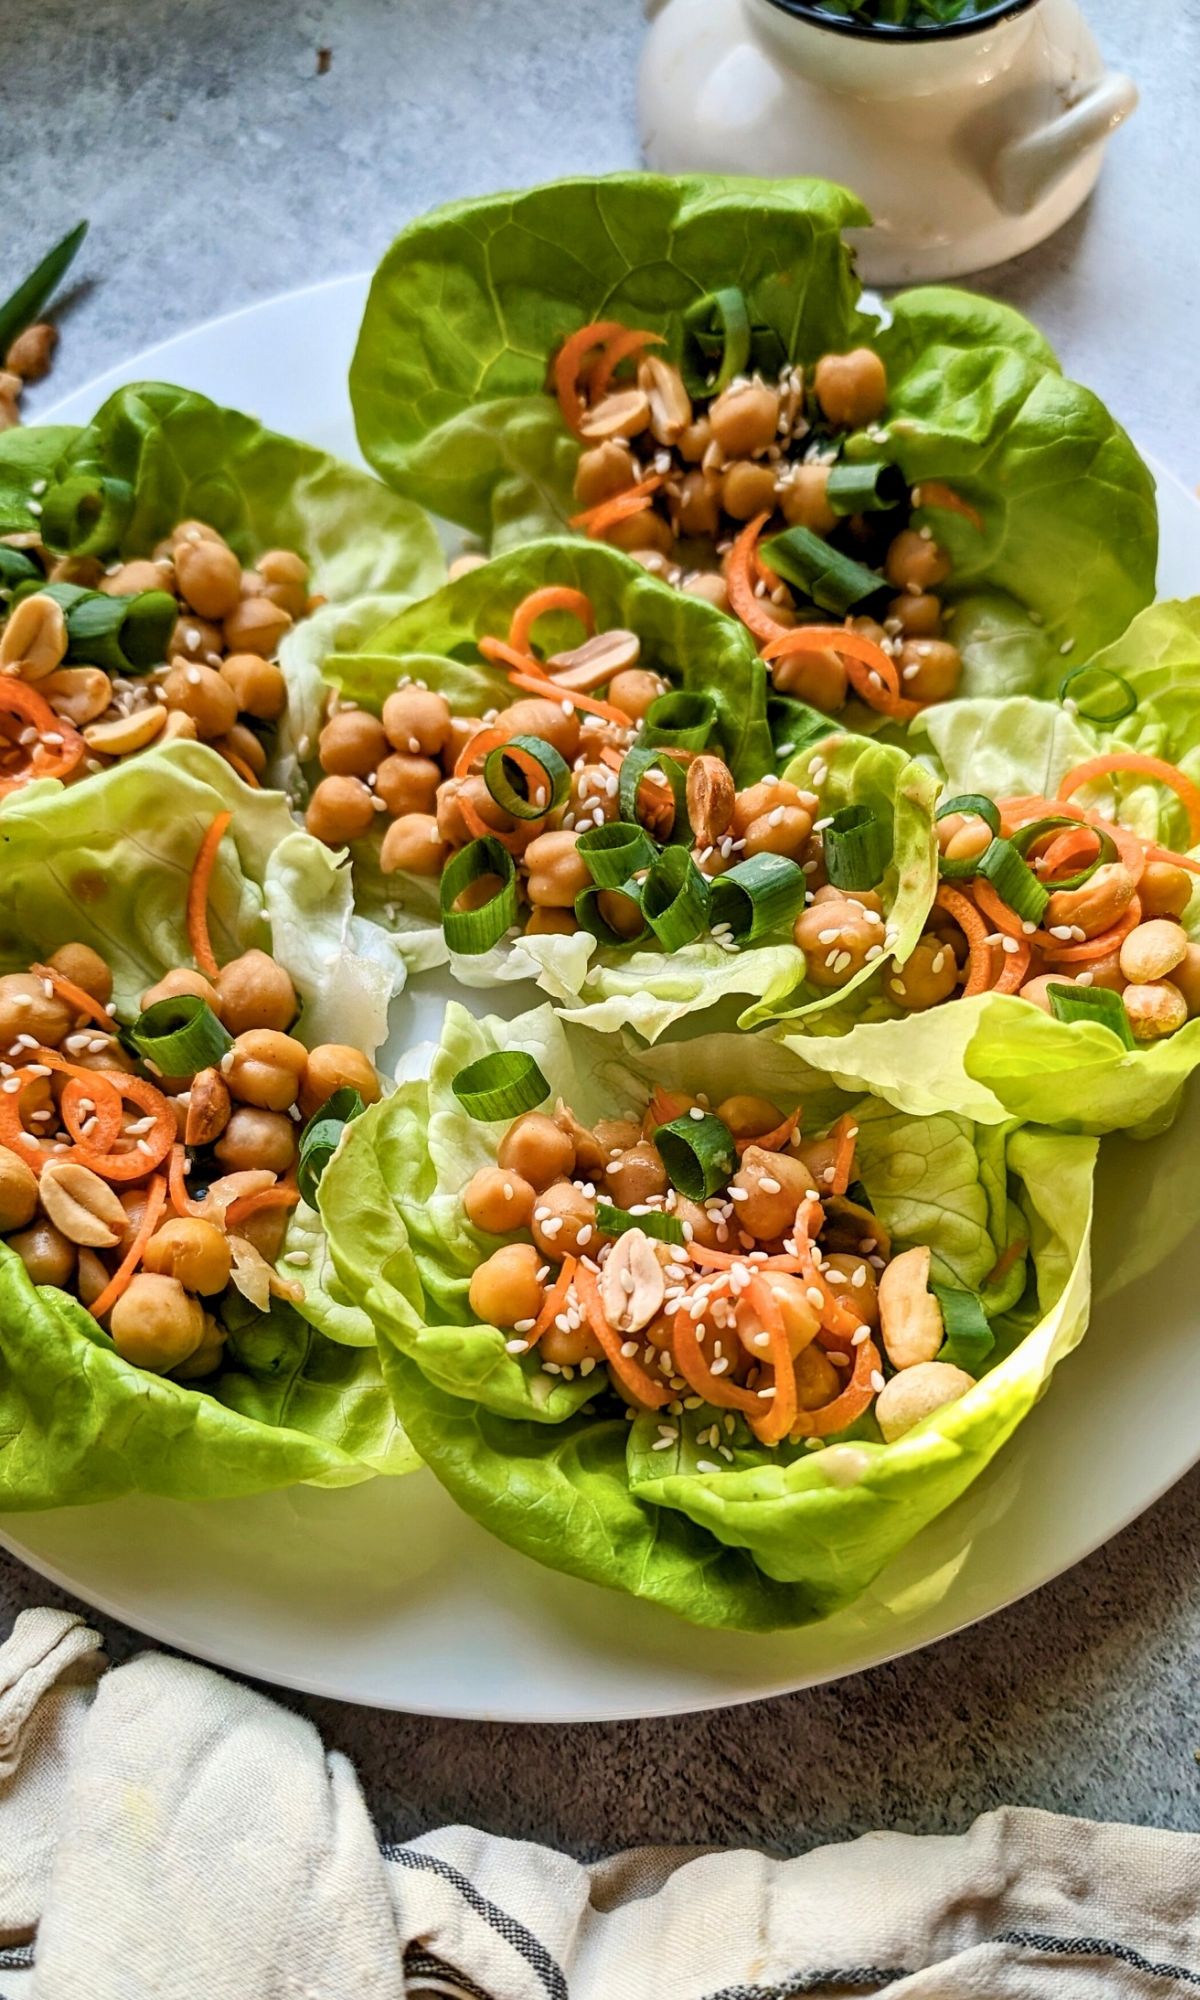 bibb lettuce cups filled with vegan chickpea and peanut filling with an asian peanut sauce on a plate